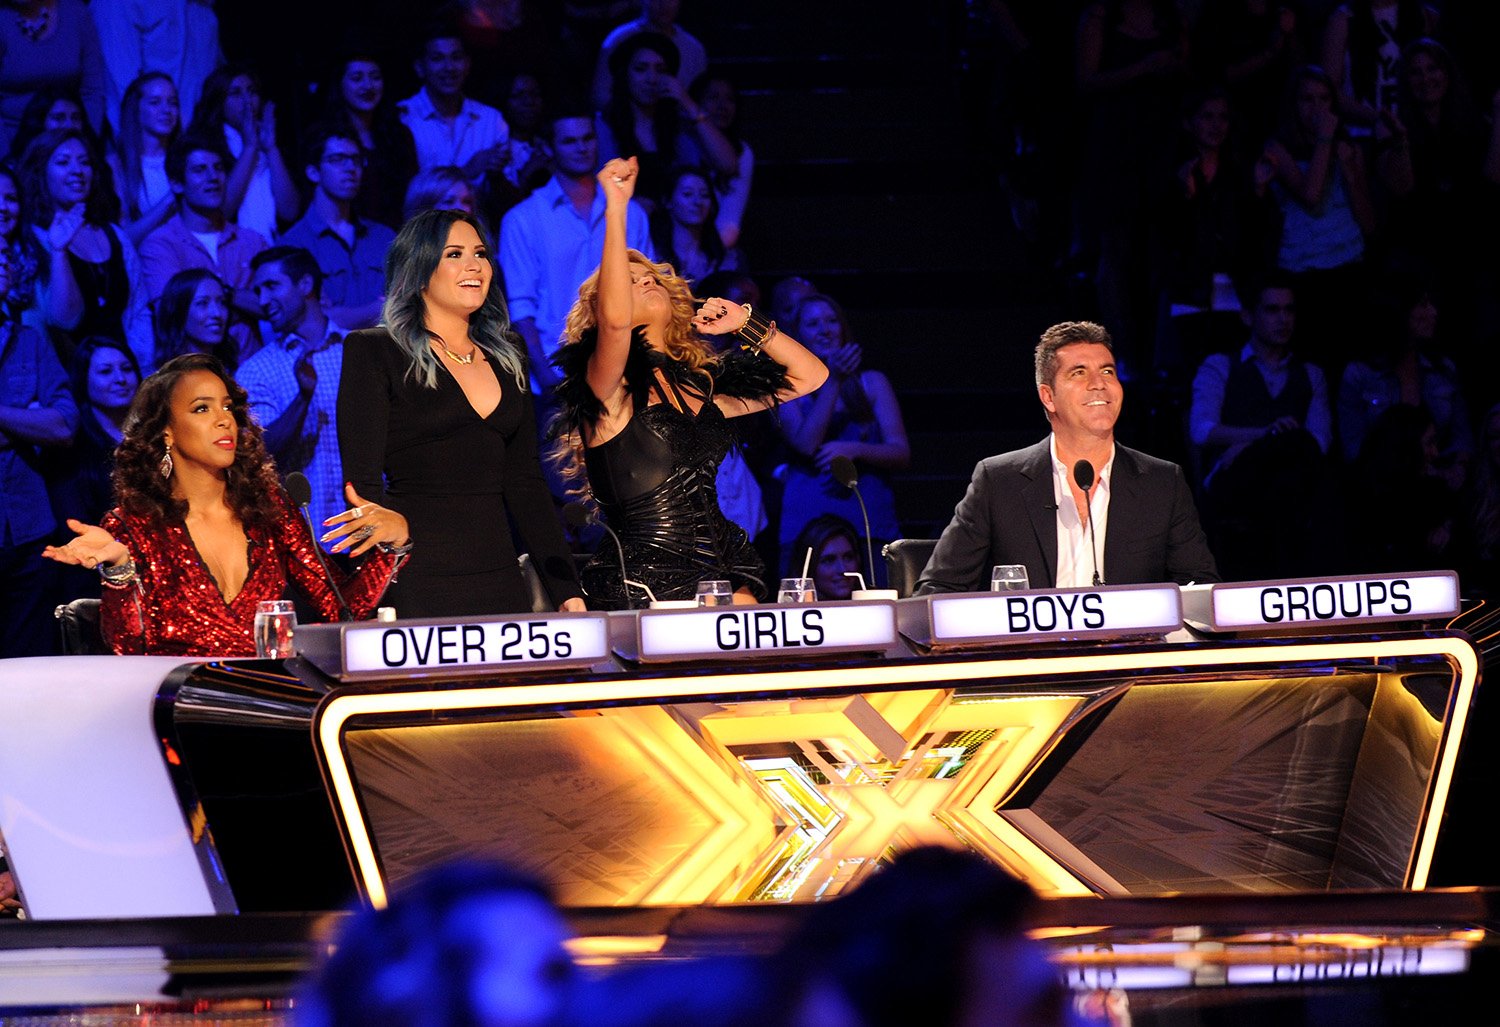 X Factor USA: Kelly Rowland, Demi Lovato, Paulina Rubio and Simon Cowell smiling and cheering at the judges' table.